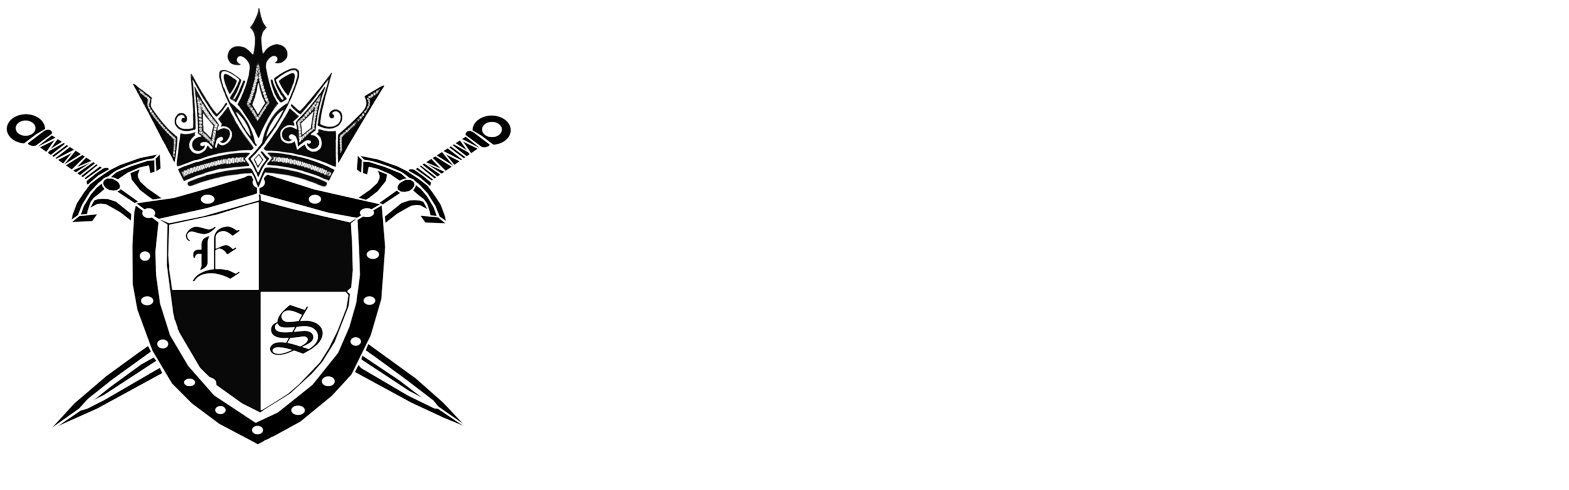 Excellence Security & Automation